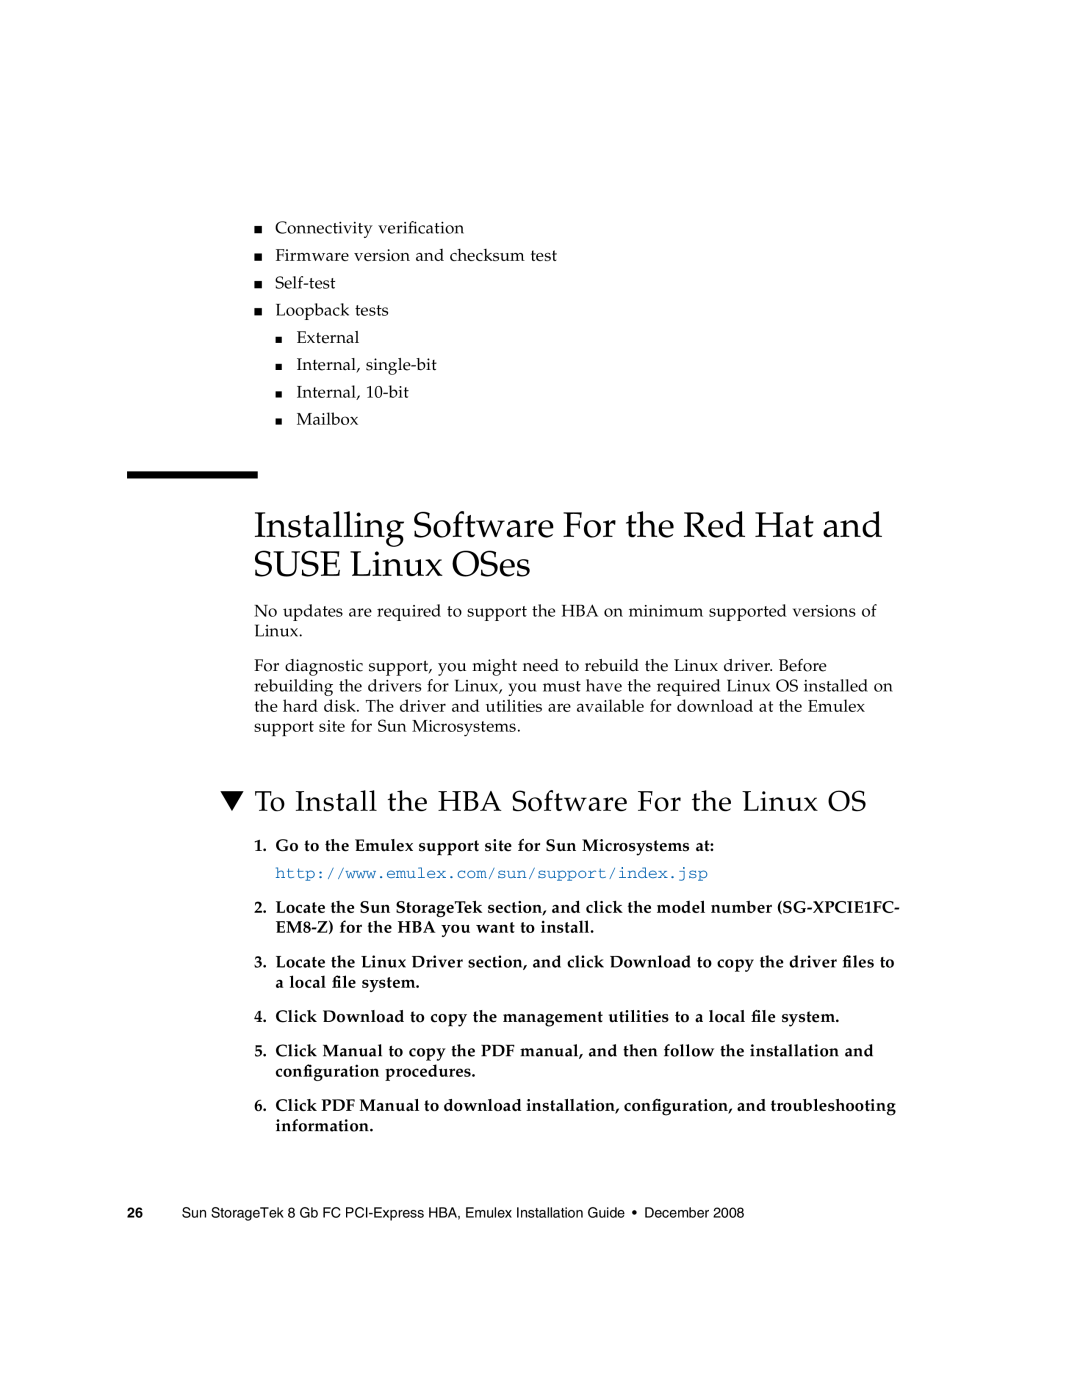 Sun Microsystems SG-XPCIE2FC-EM8-Z, SG-XPCIE1FC-EM8-Z manual Installing Software For the Red Hat and SUSE Linux OSes 